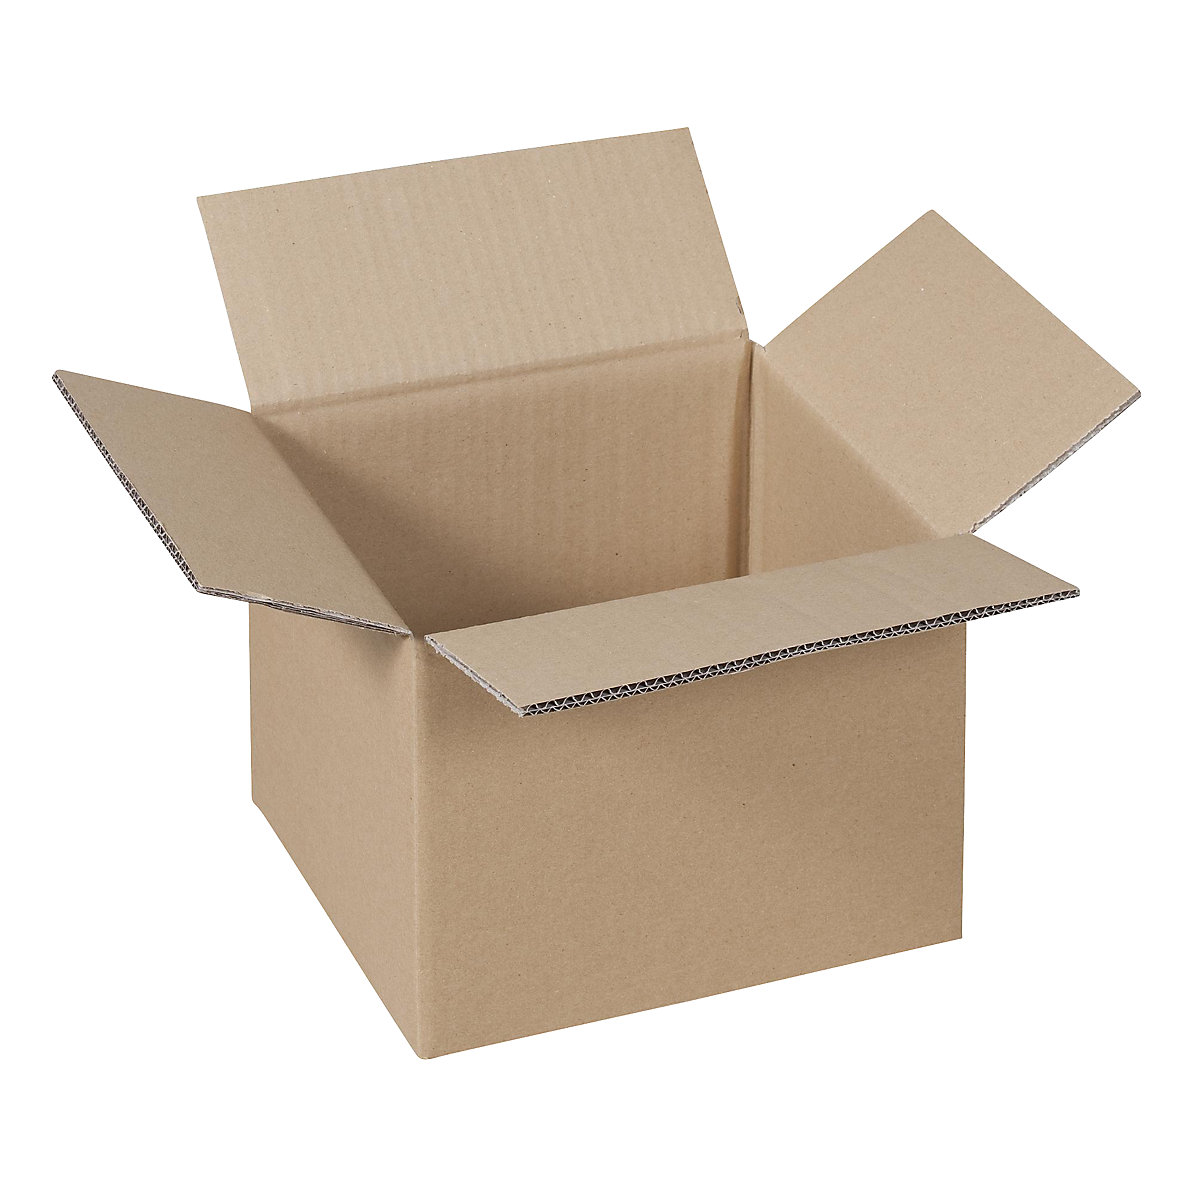 Folding cardboard box, FEFCO 0201, made of double fluted cardboard, internal dimensions 234 x 184 x 168 mm, pack of 100-14